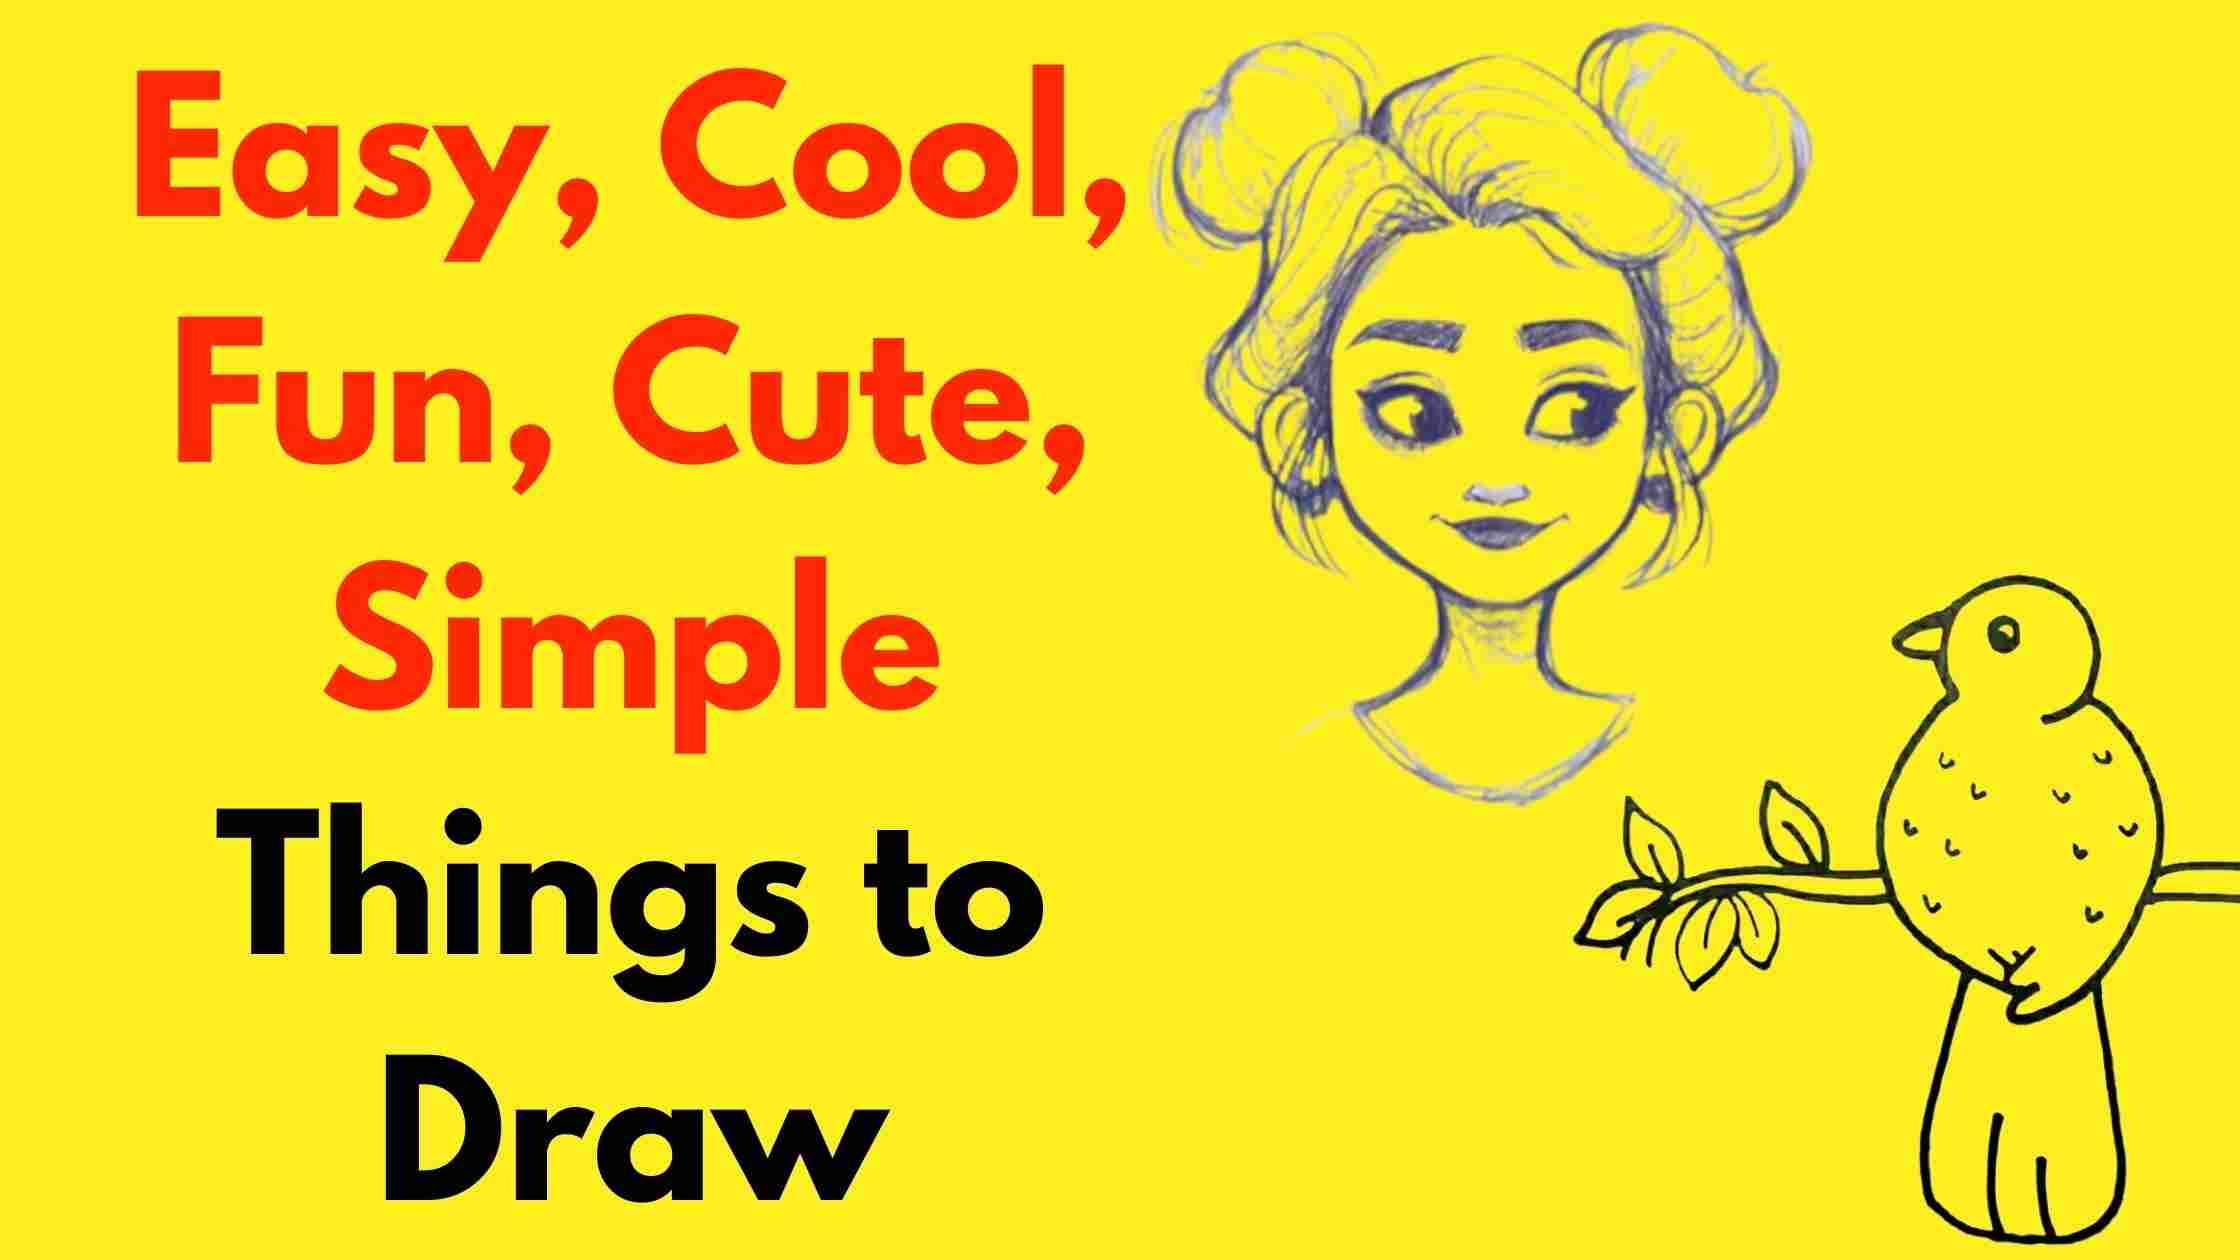 Easy, Cool, Fun, Cute, Simple Things to Draw When You Are Bored